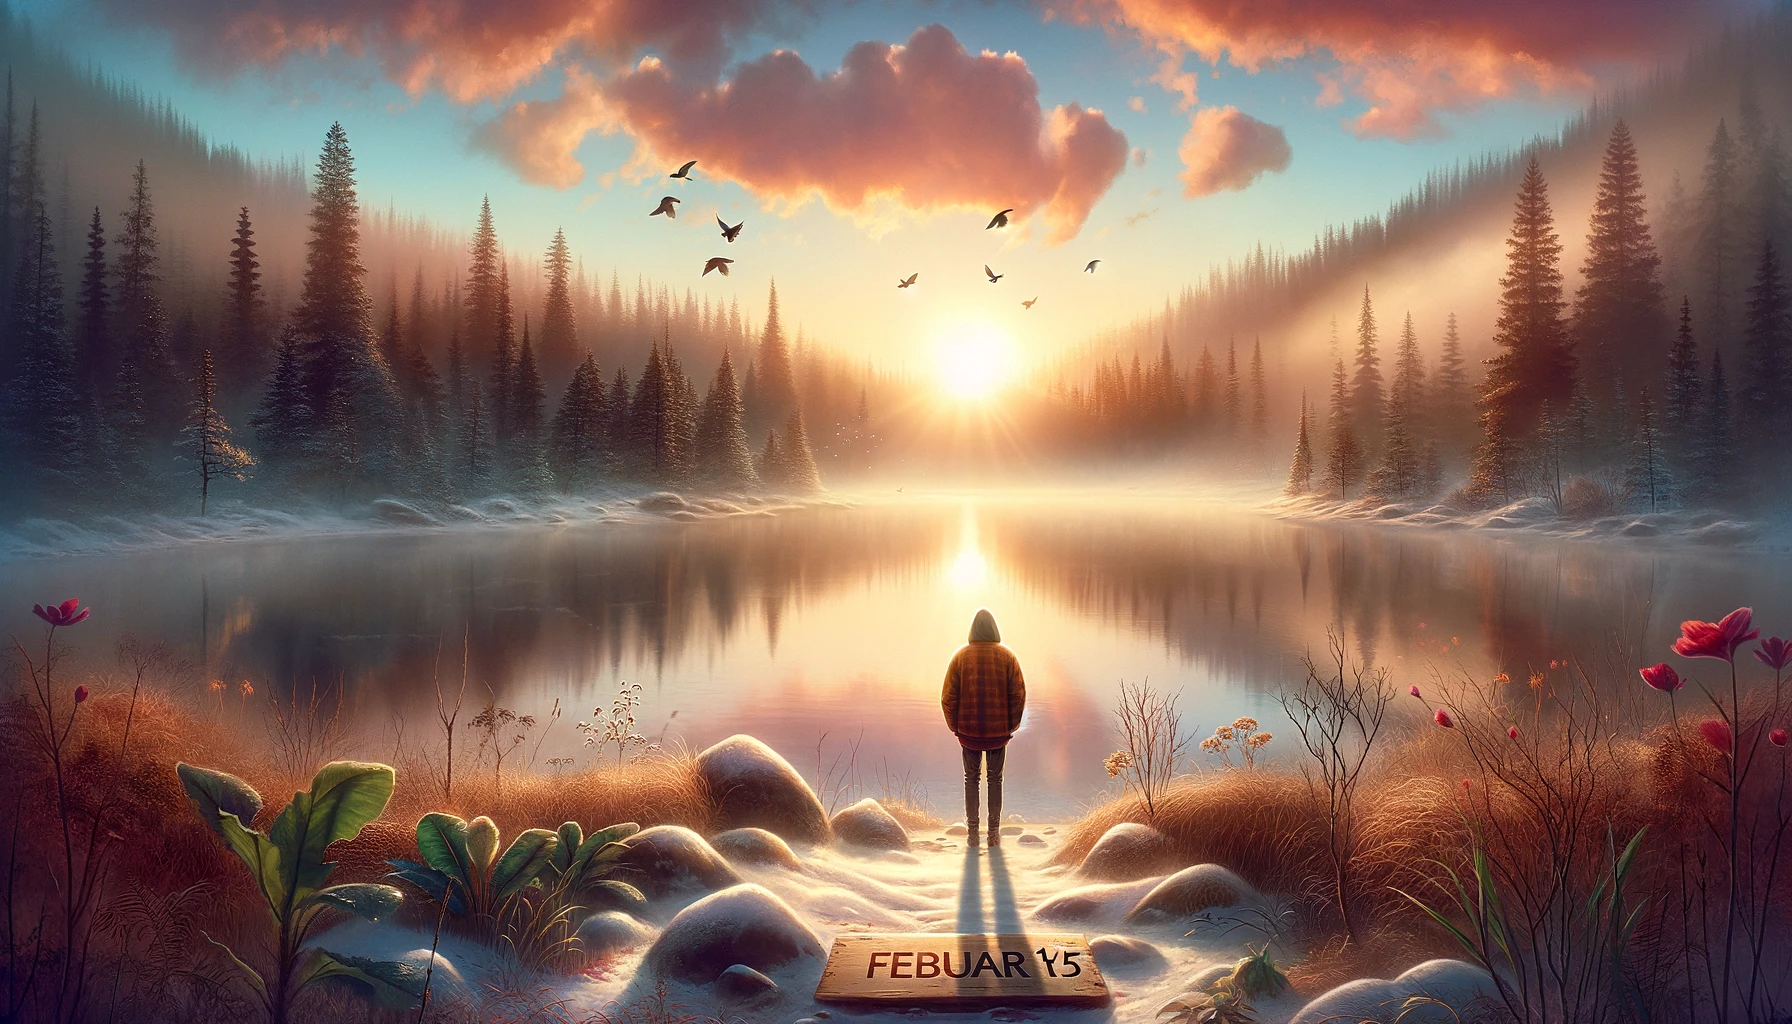 Visualize a moment of awakening and spiritual renewal on a recovery journey, set on February 15th. The image captures a solitary figure standing at th